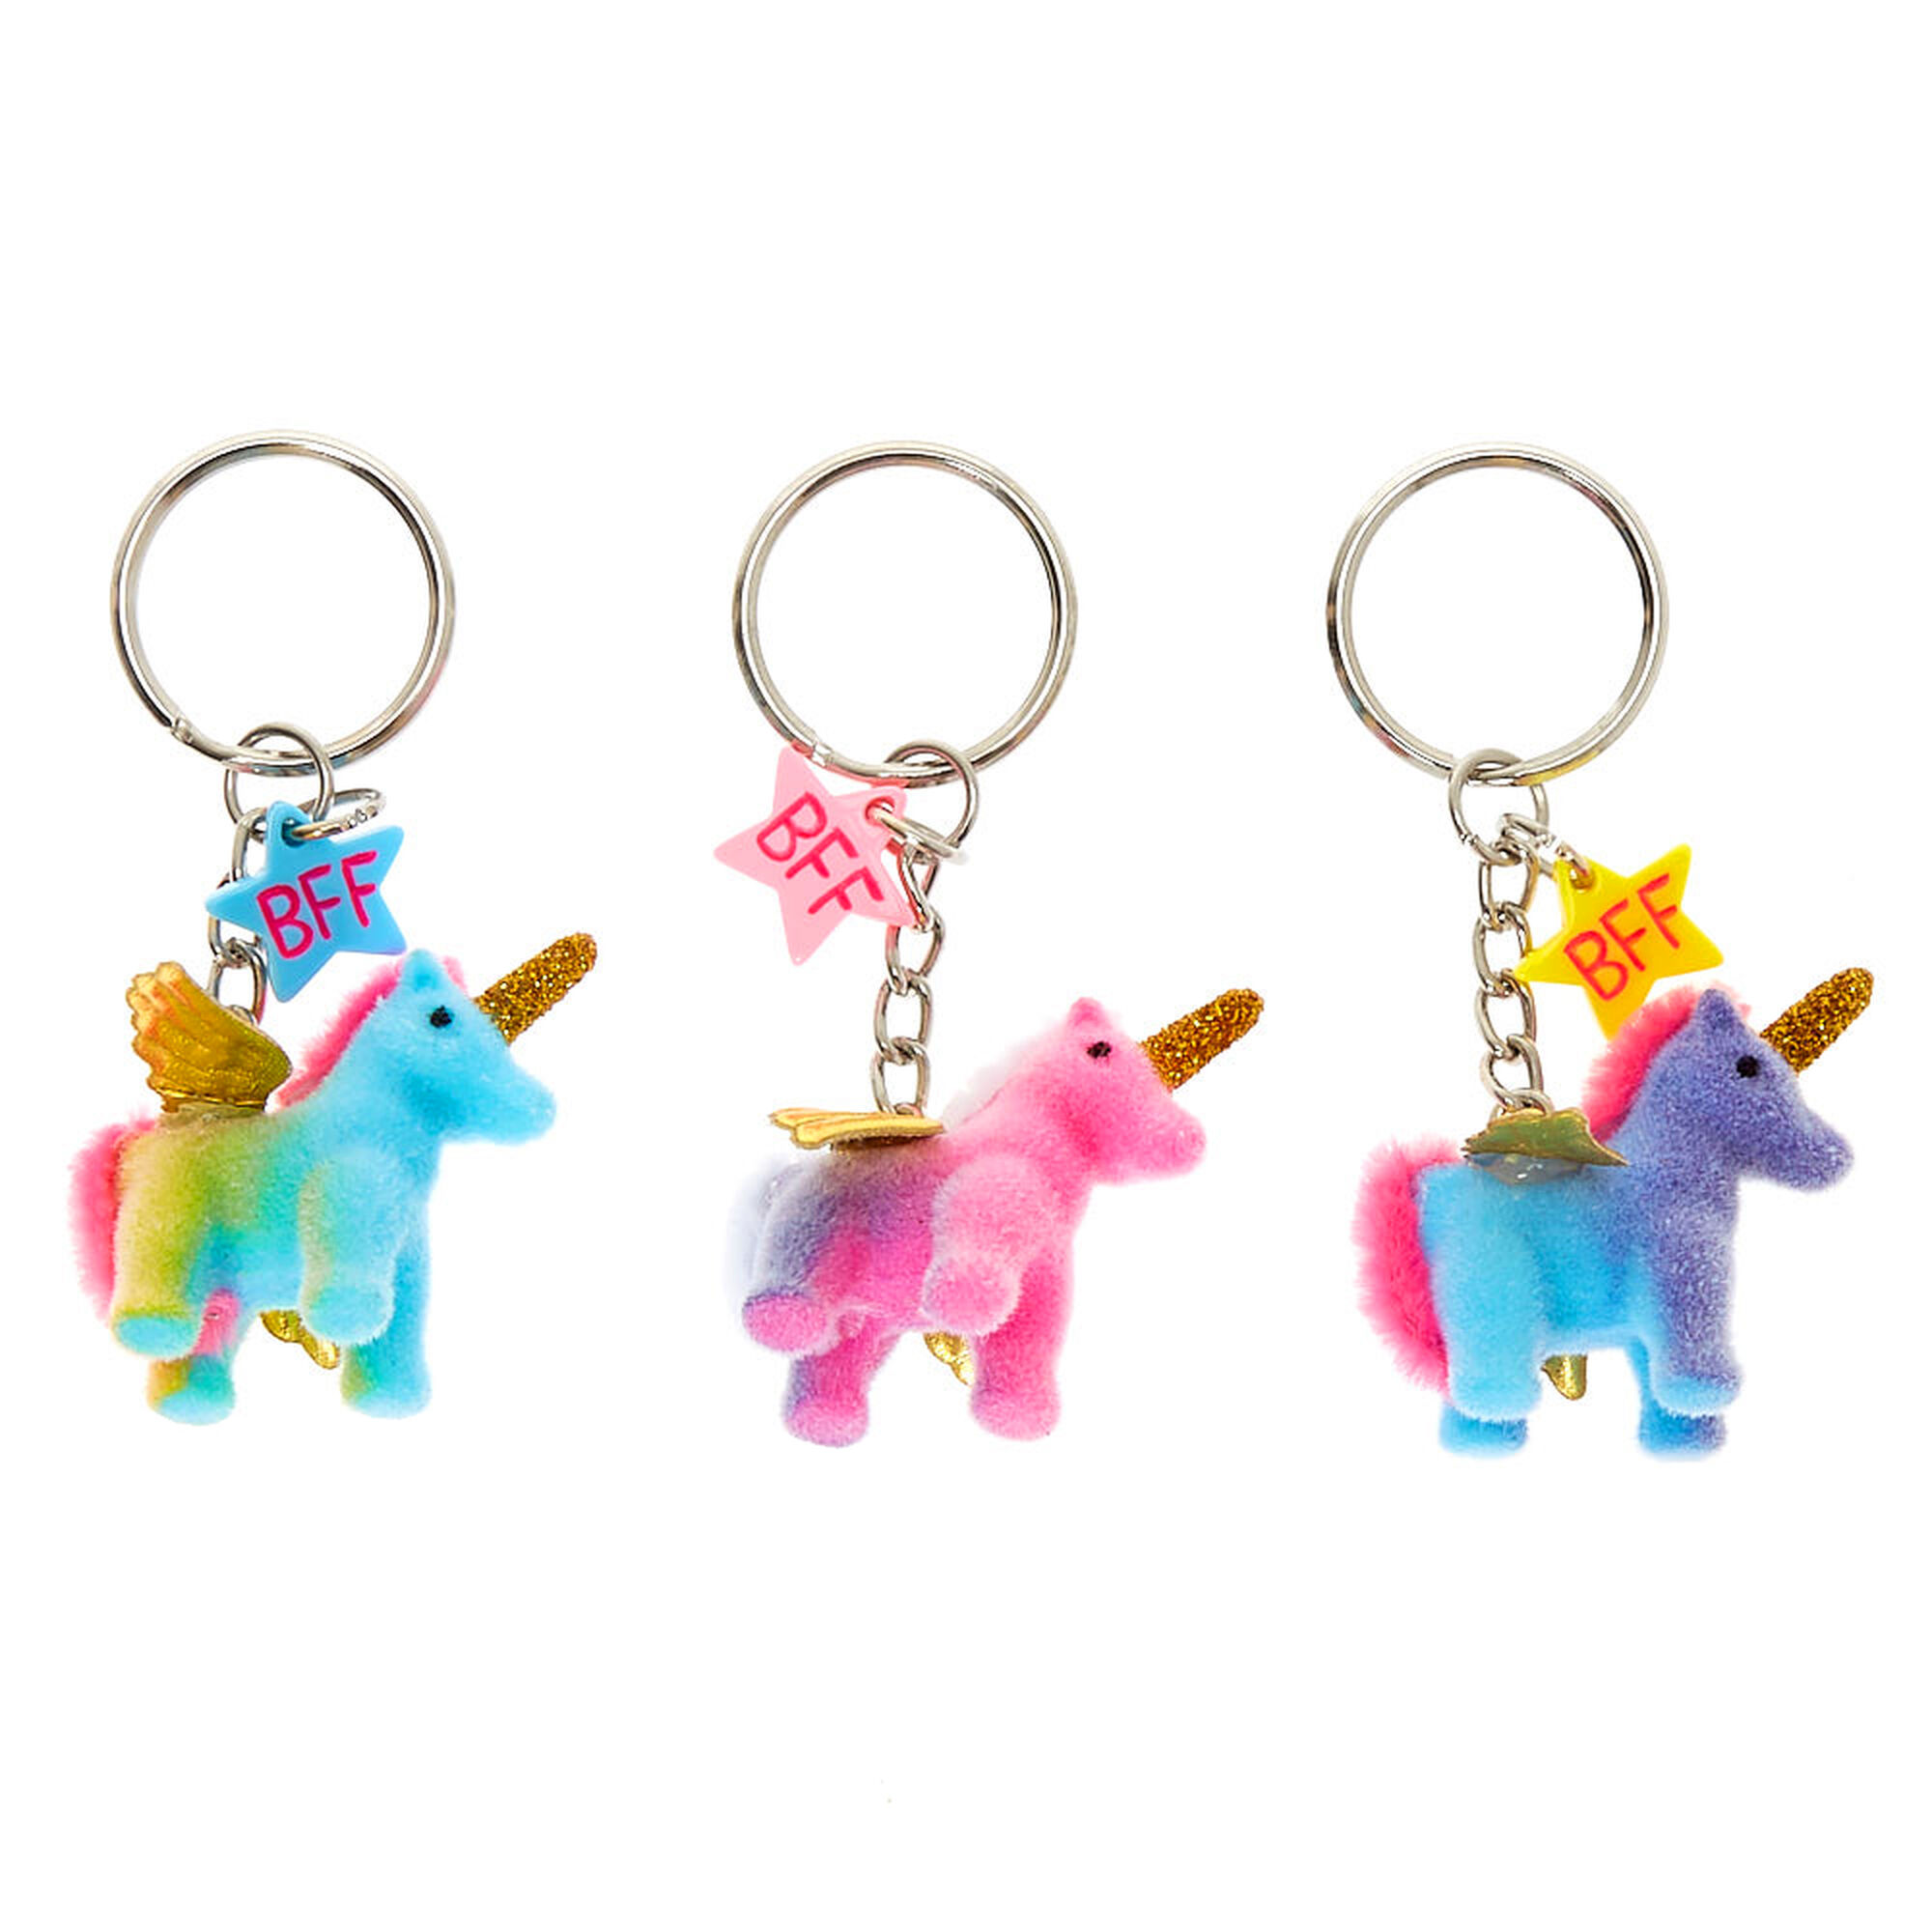 Bff Keychains For Cheap Wholesale | www.doubleaabuilders.com